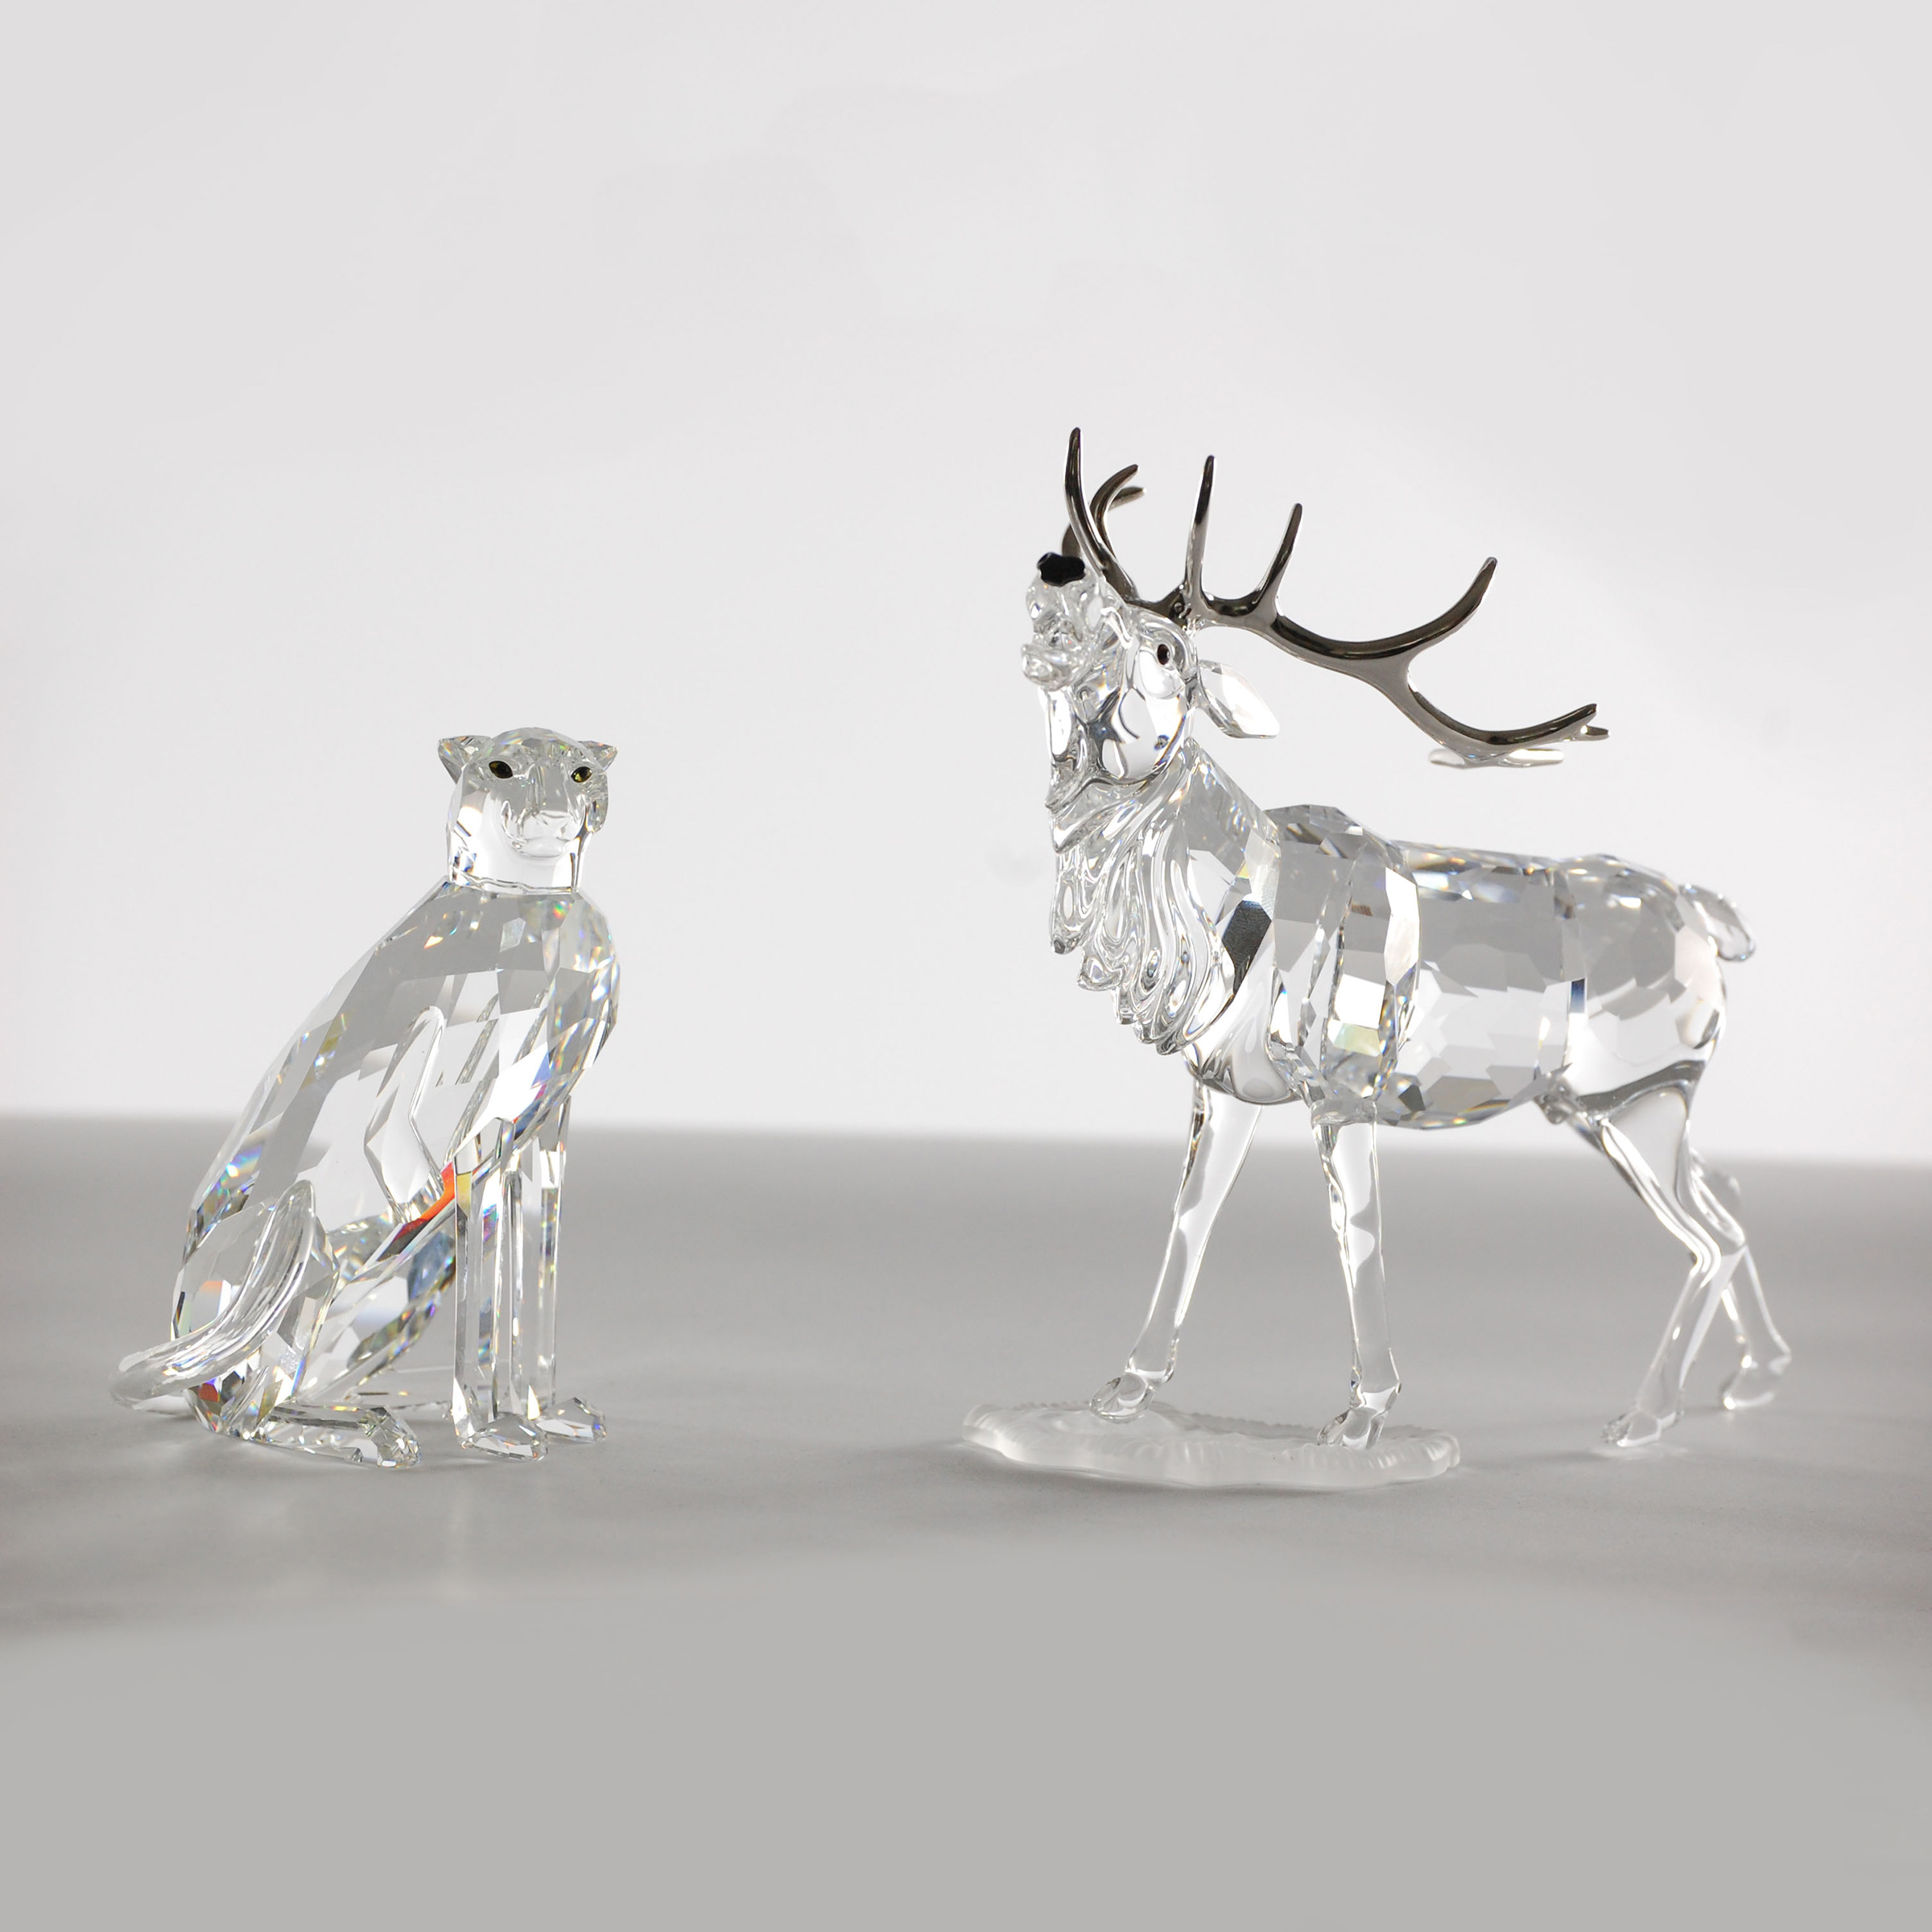 Swarovski Crystal Moose and Bobcat, late 20th/early 21st century